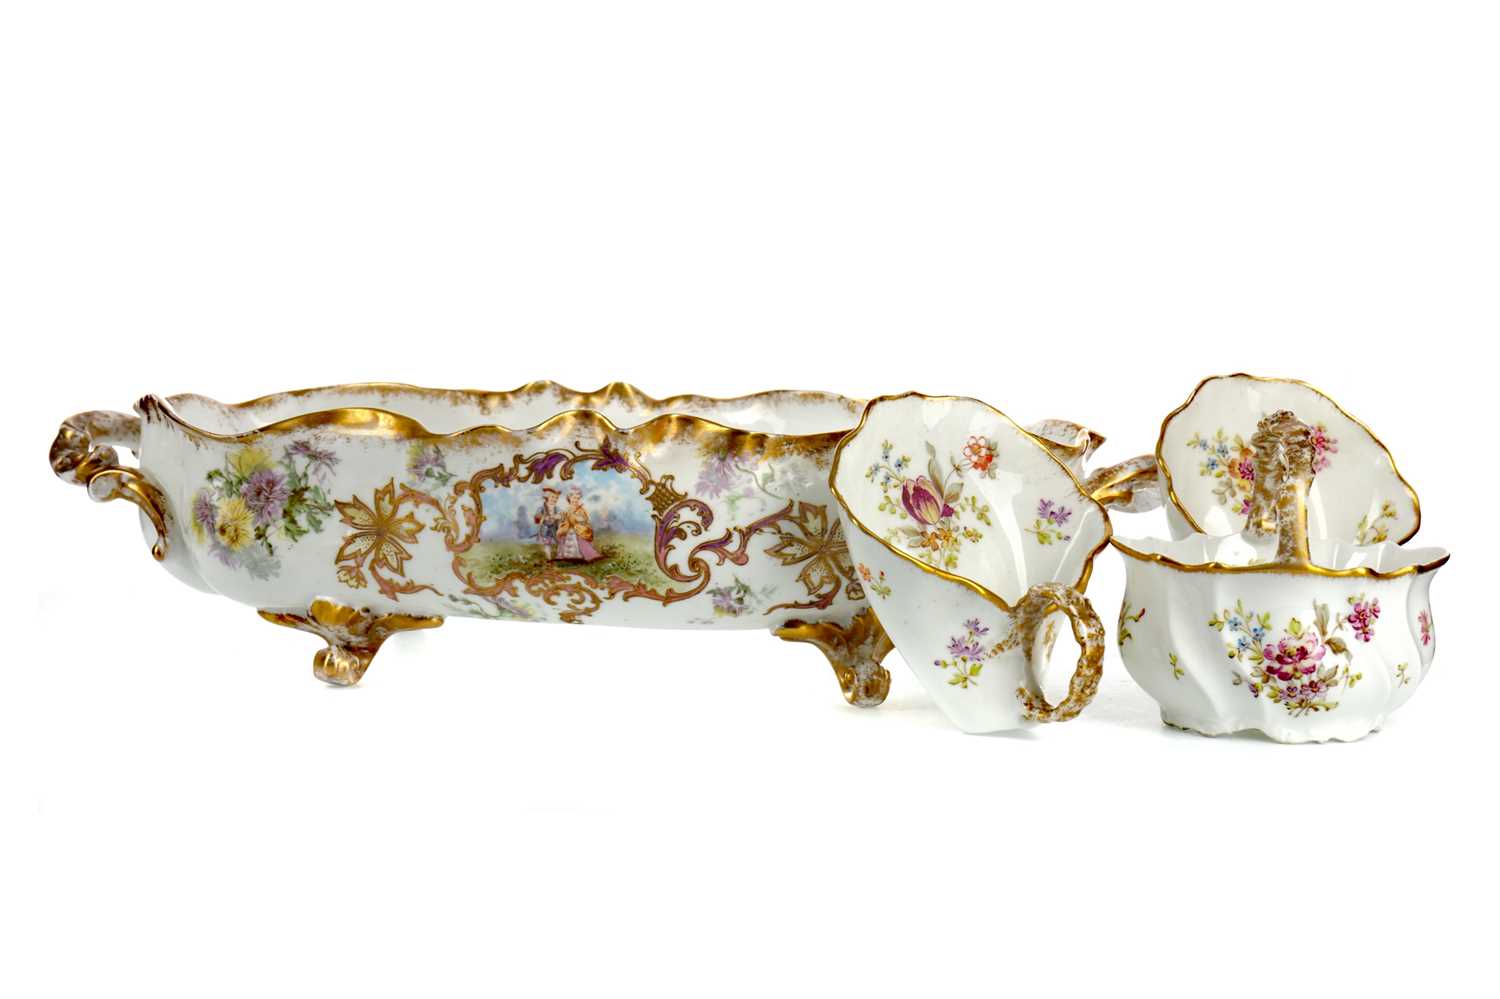 Lot 1040 - AN EARLY 20TH CENTURY LIMOGES PORCELAIN SET